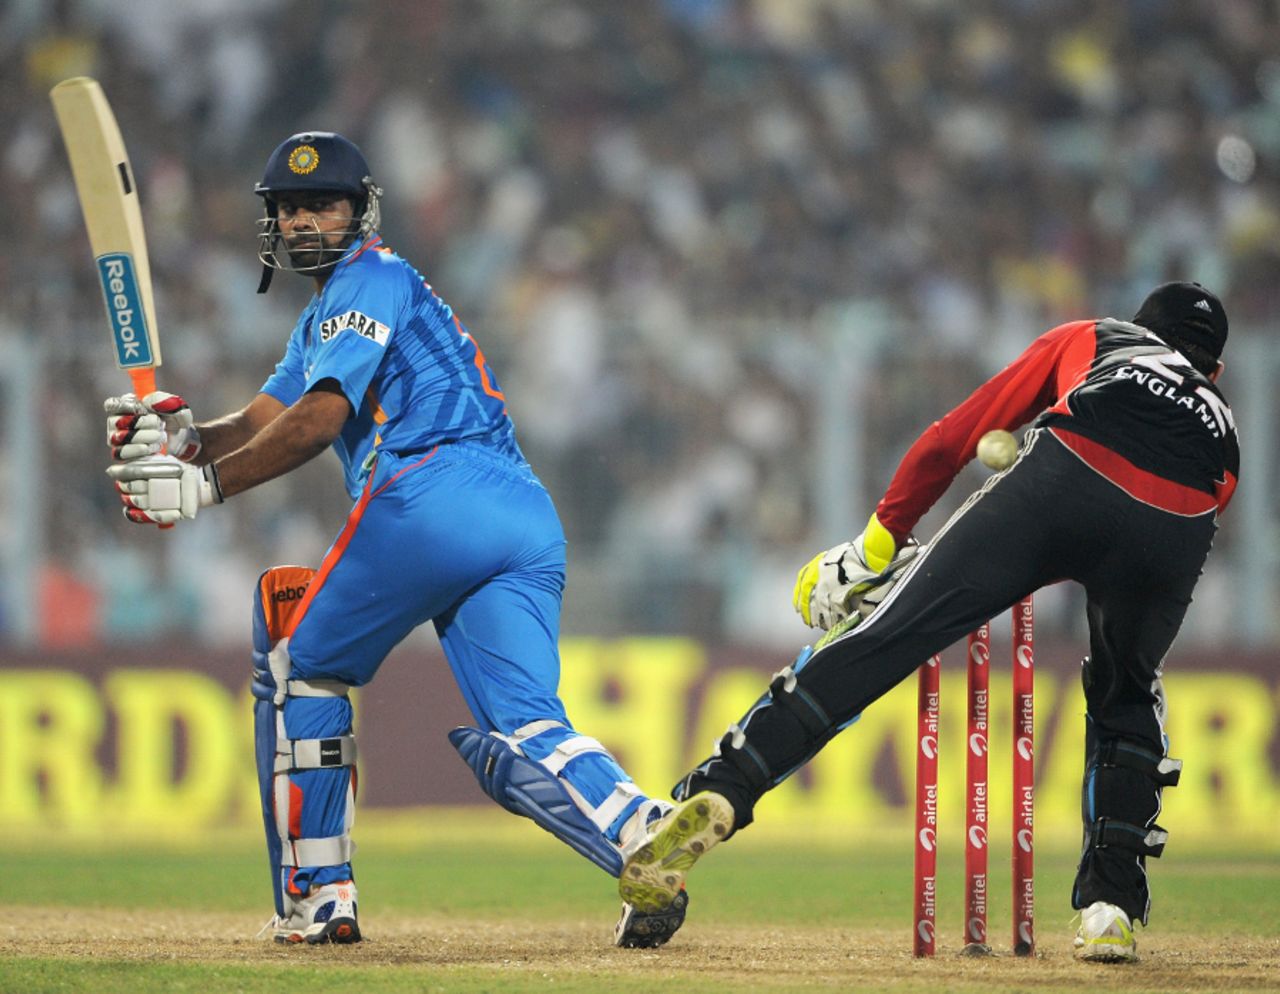 Praveen Kumar helped to boost India's total at the death, India v England, 5th ODI, Eden Gardens, October 25 2011